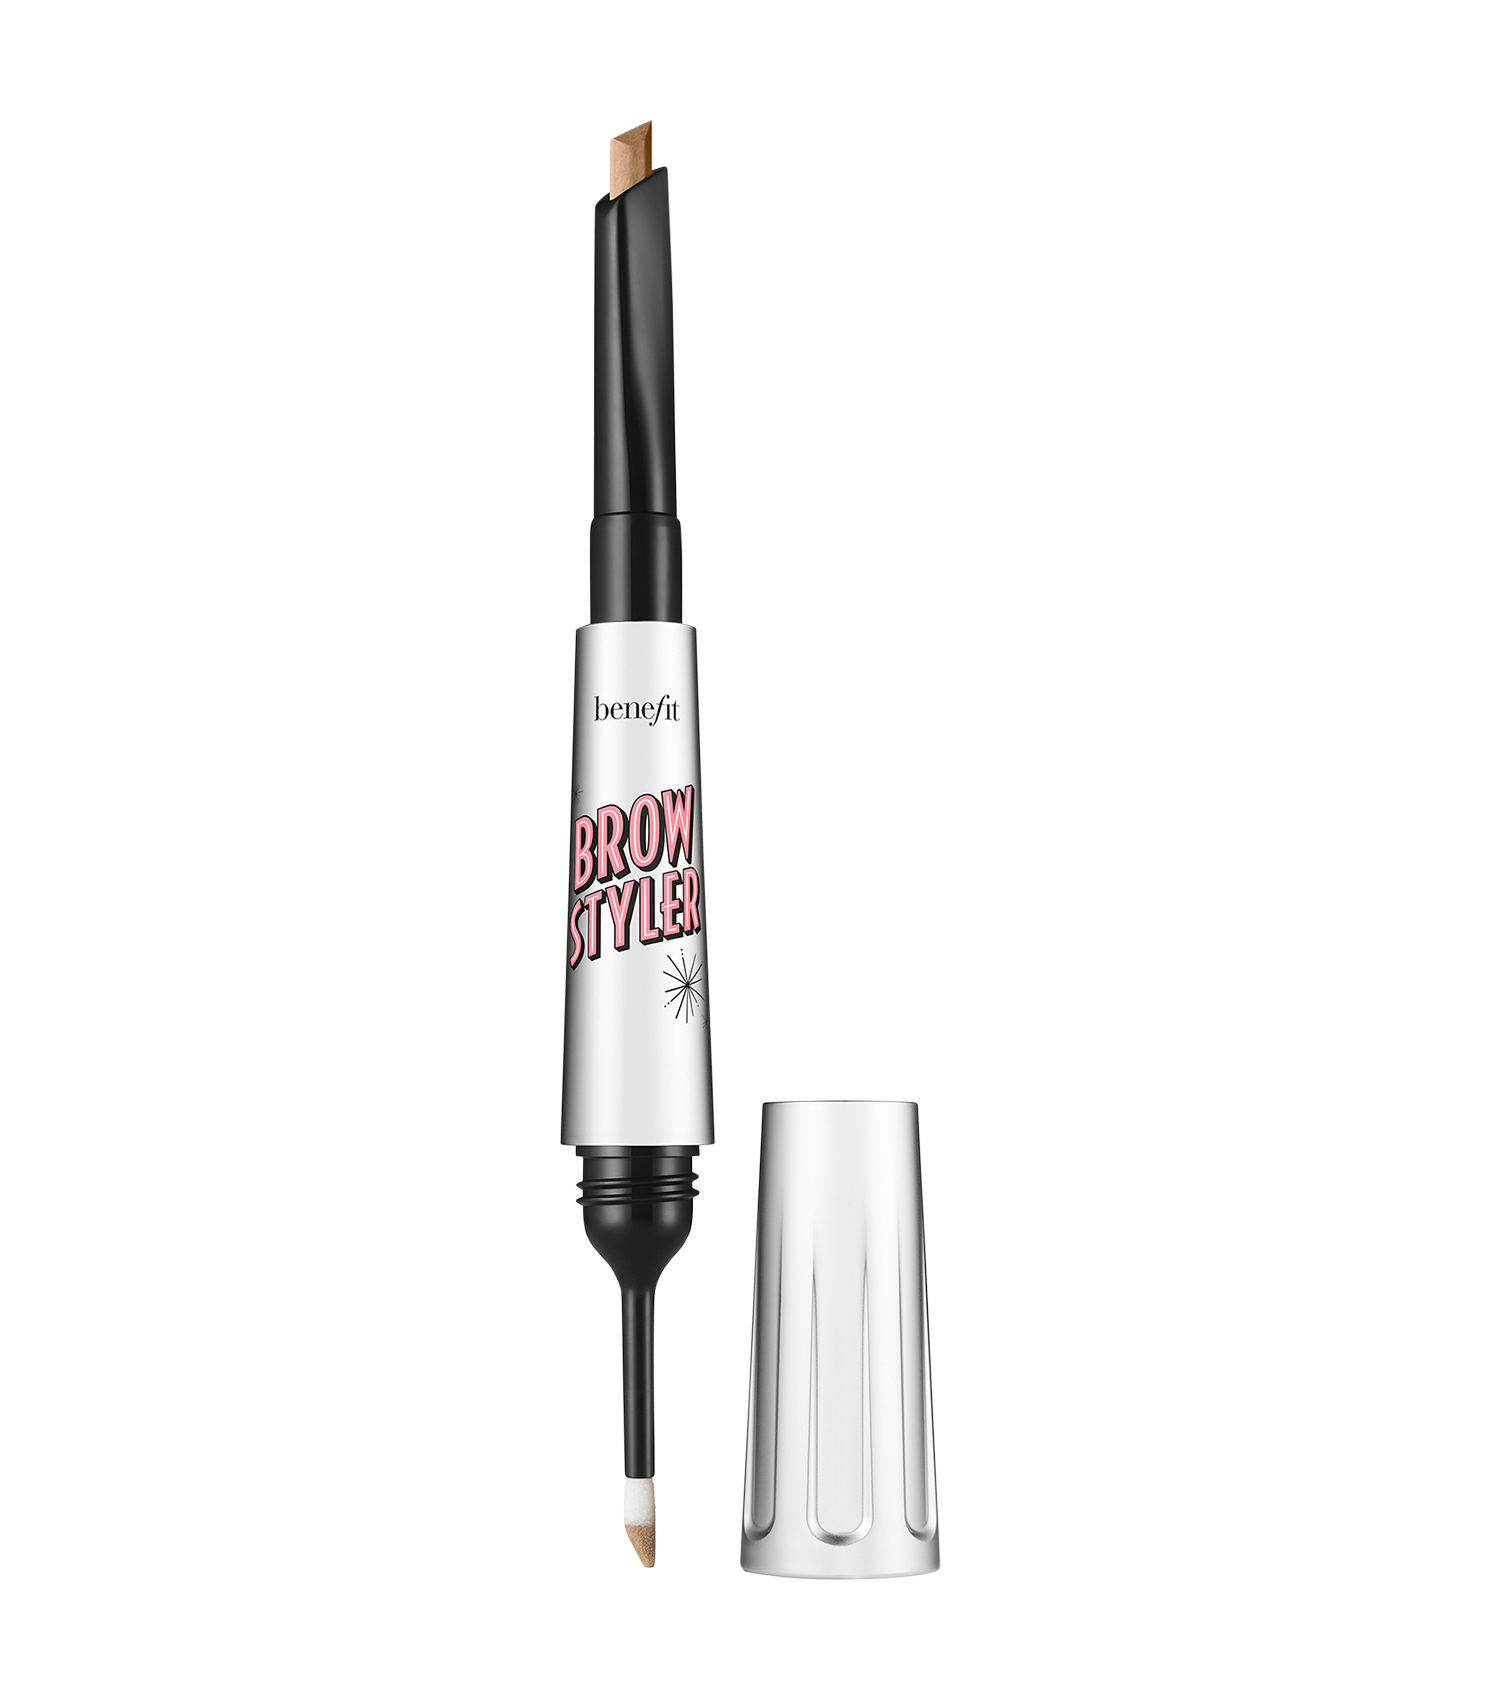 Benefit Cosmetics Brow Styler Multitasking Pencil & Powder for Brows Brow Styler Shade 02 1